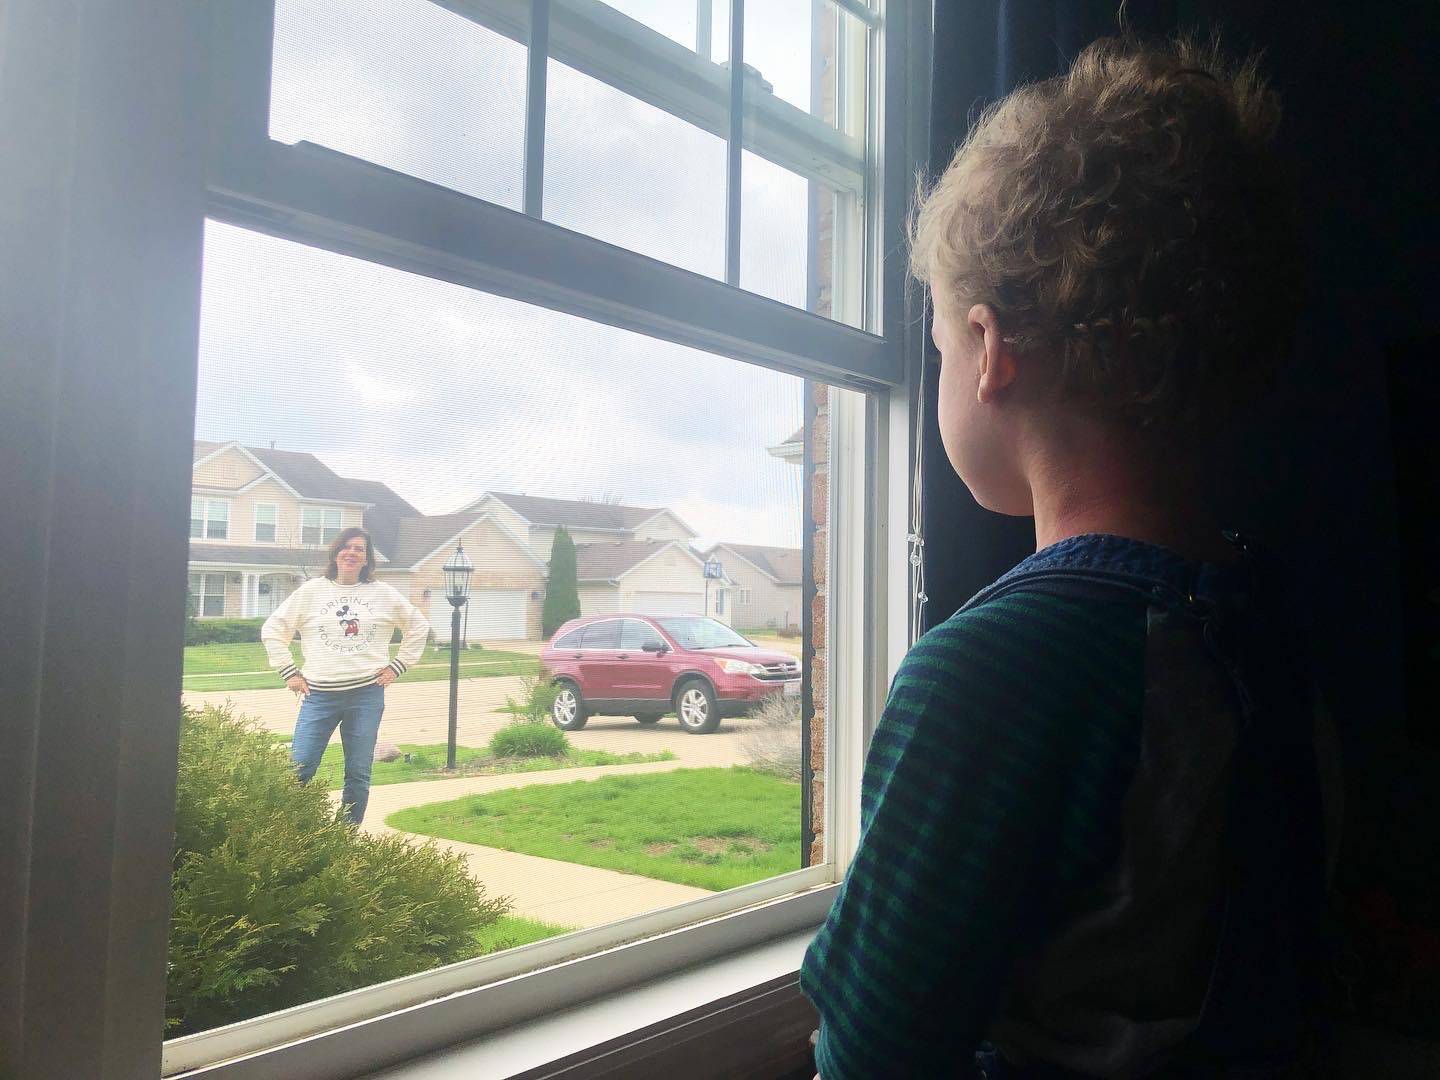 A child looks out the window to see a teacher in a Mickey sweatshirt on the front walk near the grass. Photo by Alyssa Buckley.